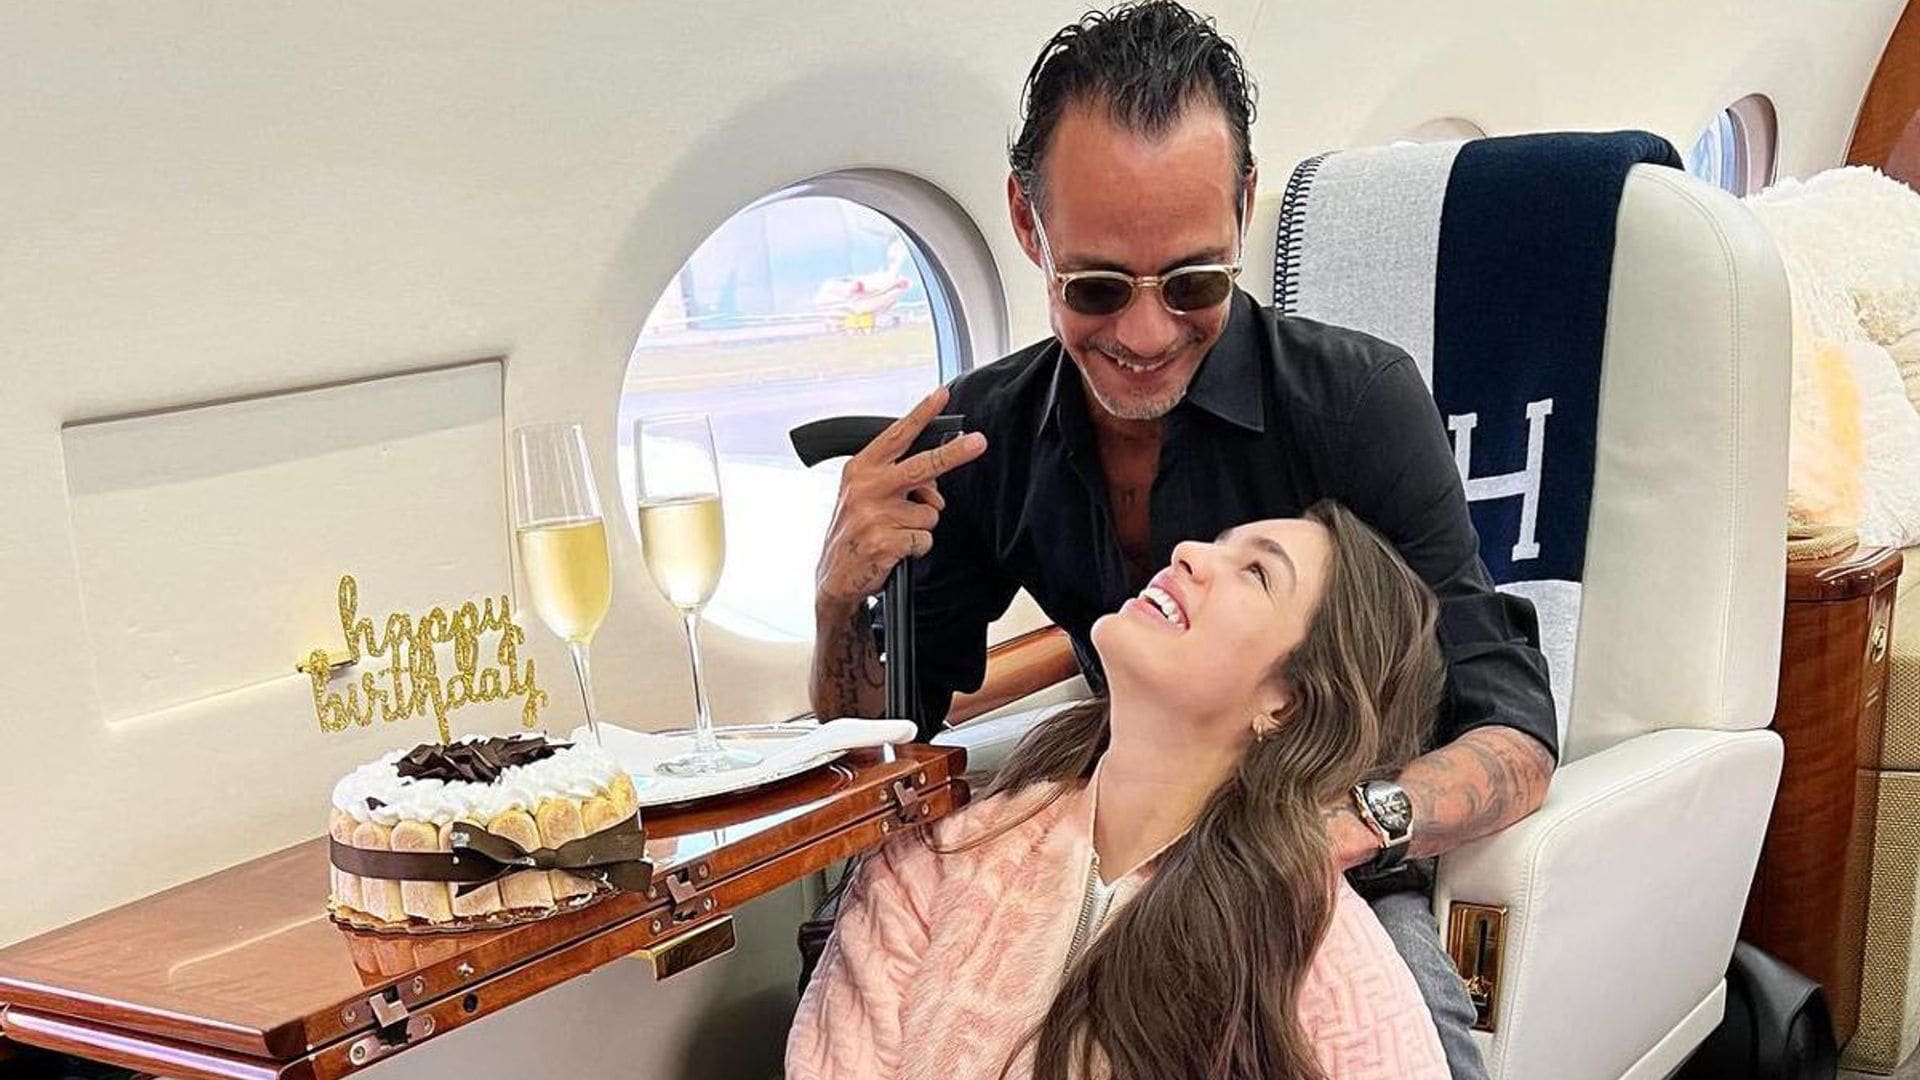 Marc Anthony visits Paraguay for the first time alongside his fiancee Nadia Ferreira